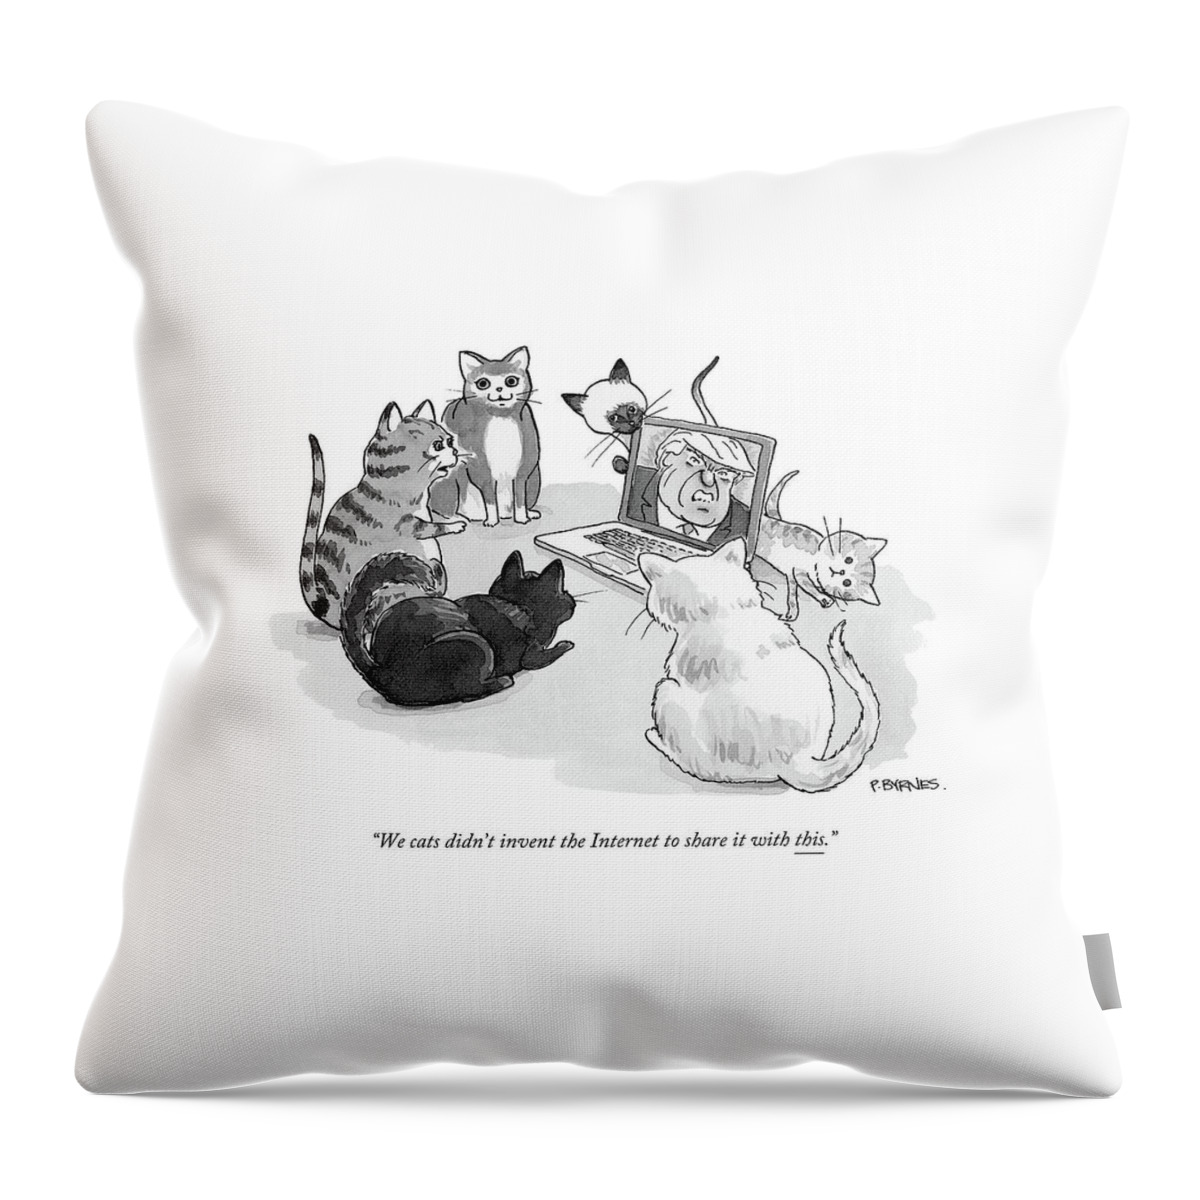 We Cats Didn't Invent The Internet To Share Throw Pillow